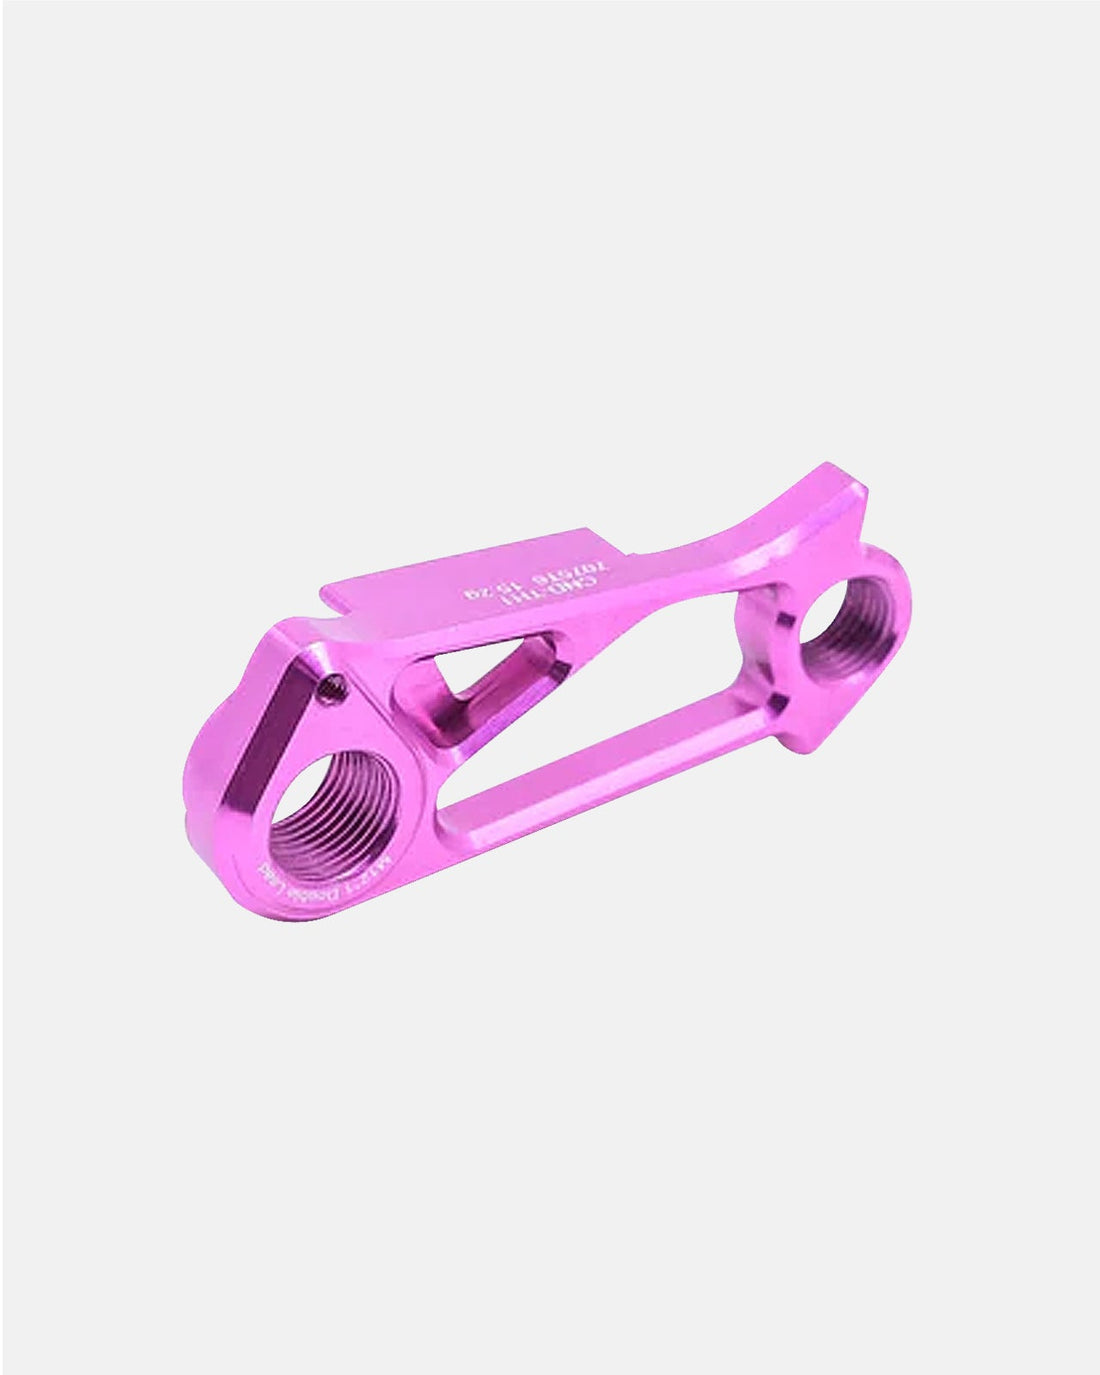 Sigeyi Cannondale Direct-Mount Disc Derailleur Hanger - Pink - Sigeyi